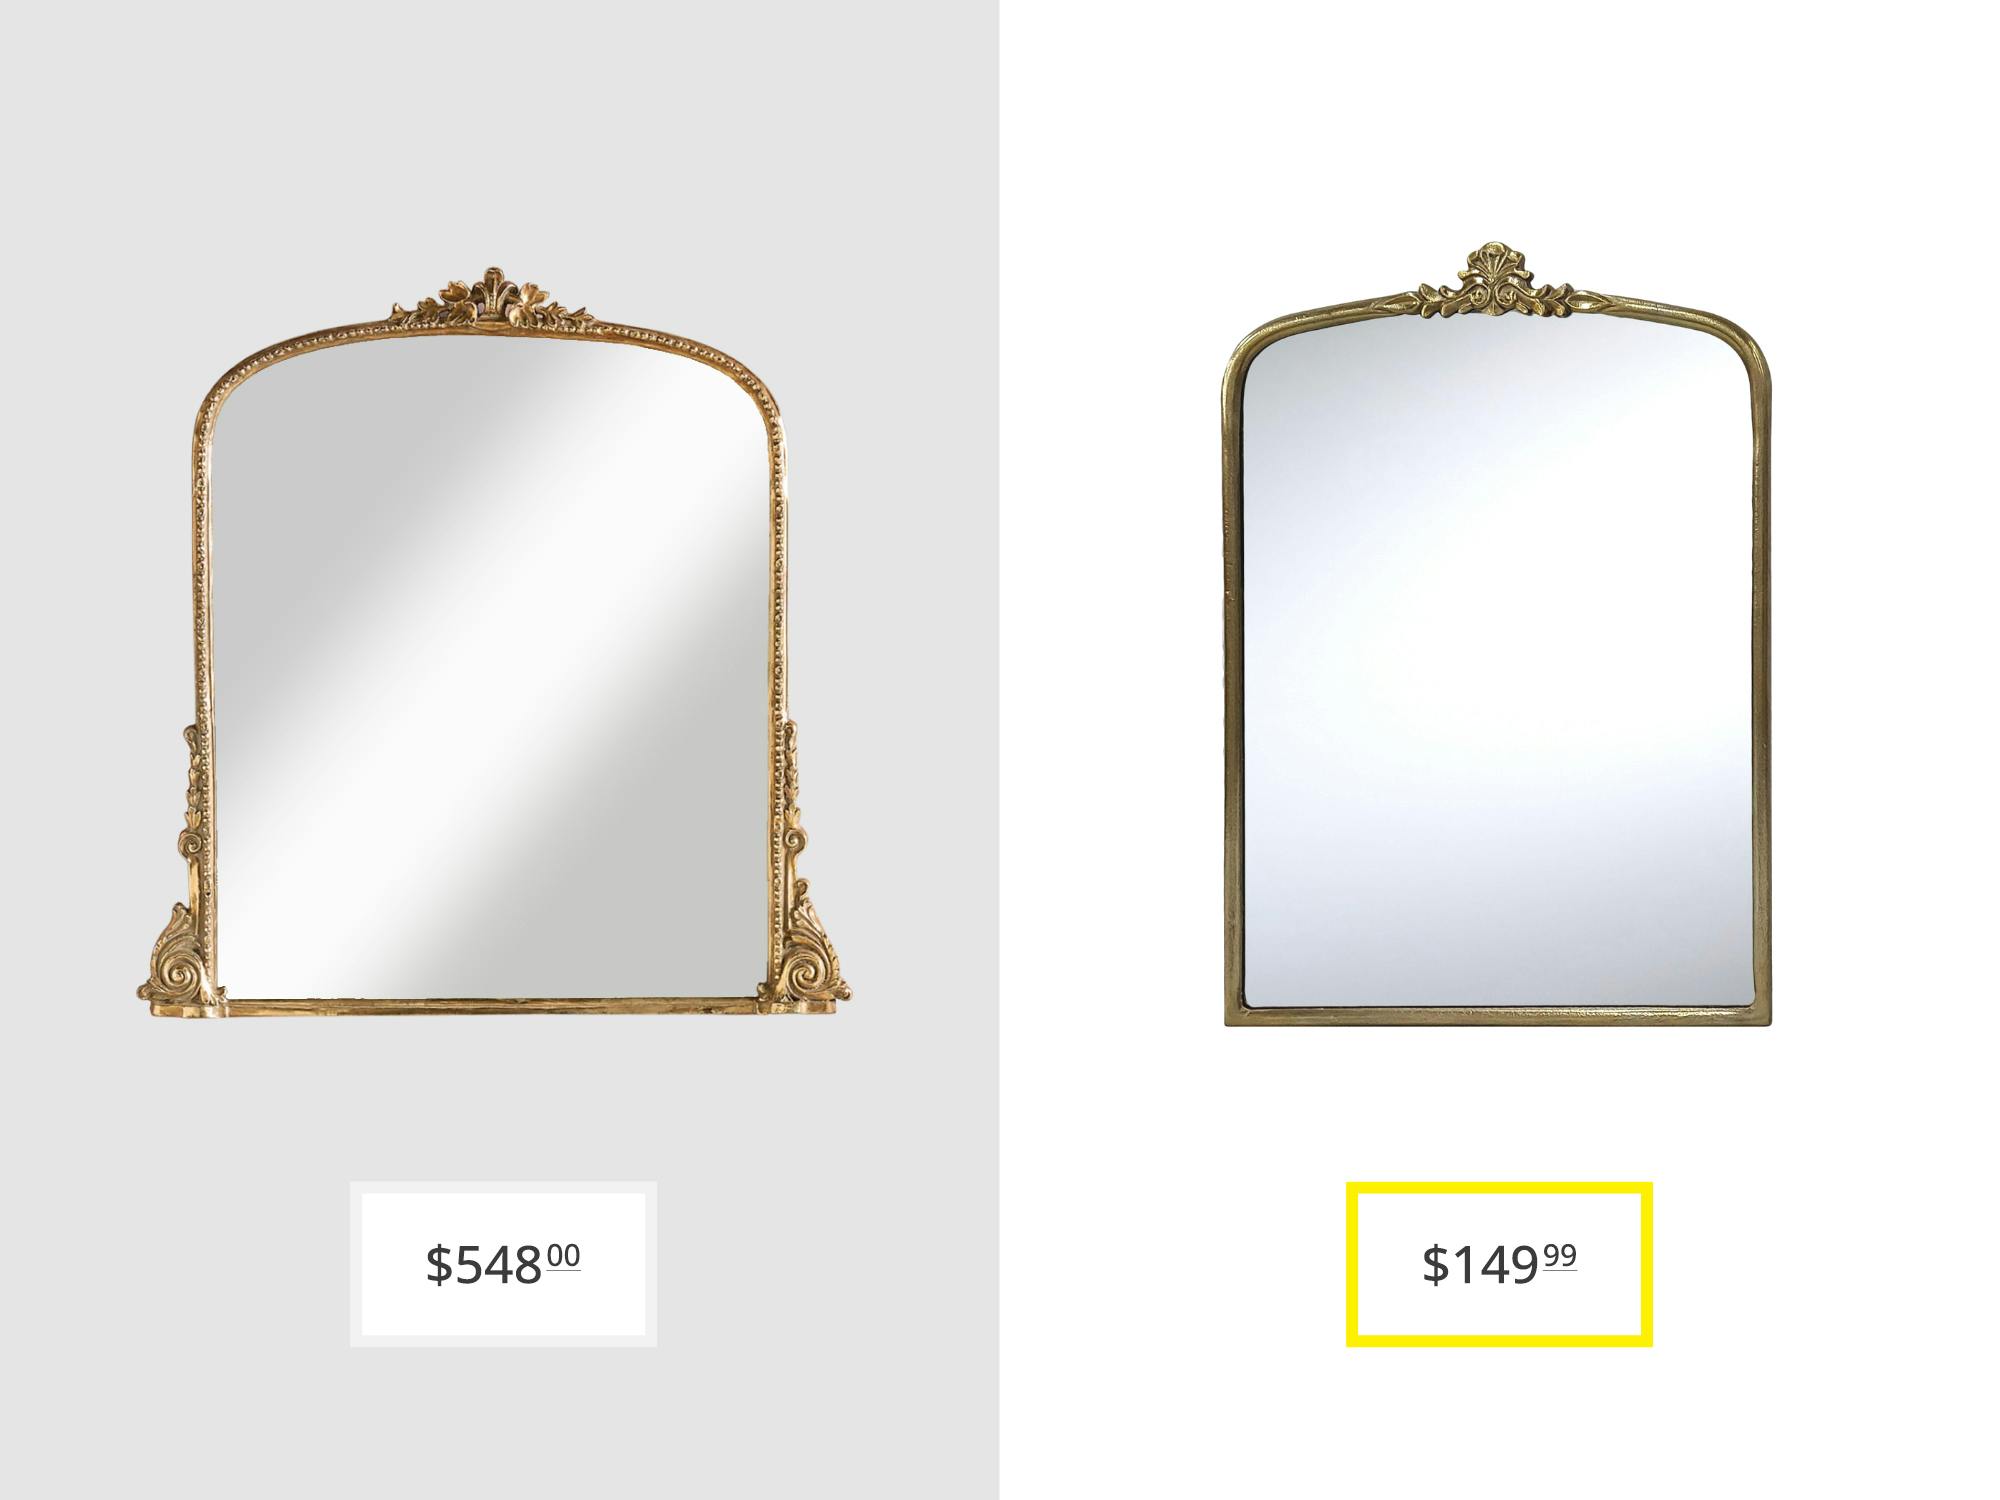 price comparison graphic with anthropologie gleaming primrose mirror and world market vintage style vanity wall mirror